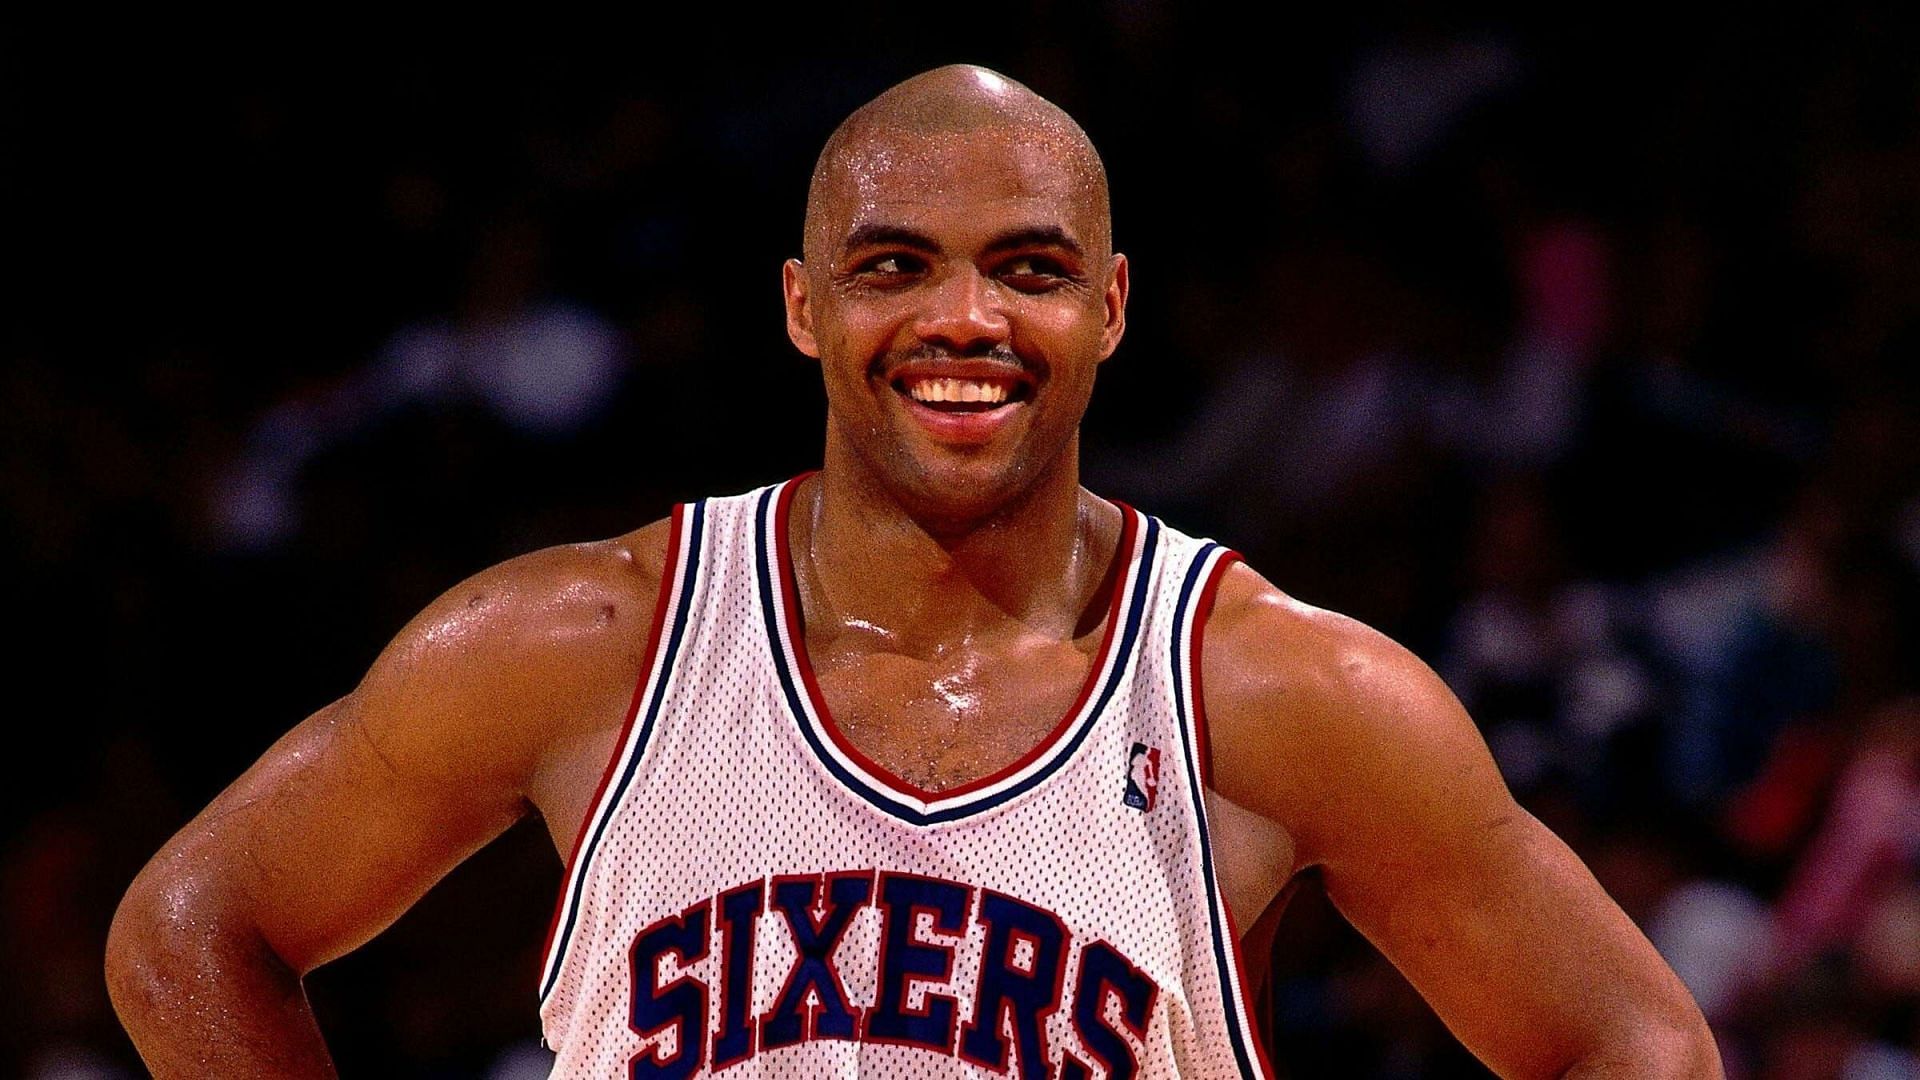 Charles Barkley dominated in the 1990s.